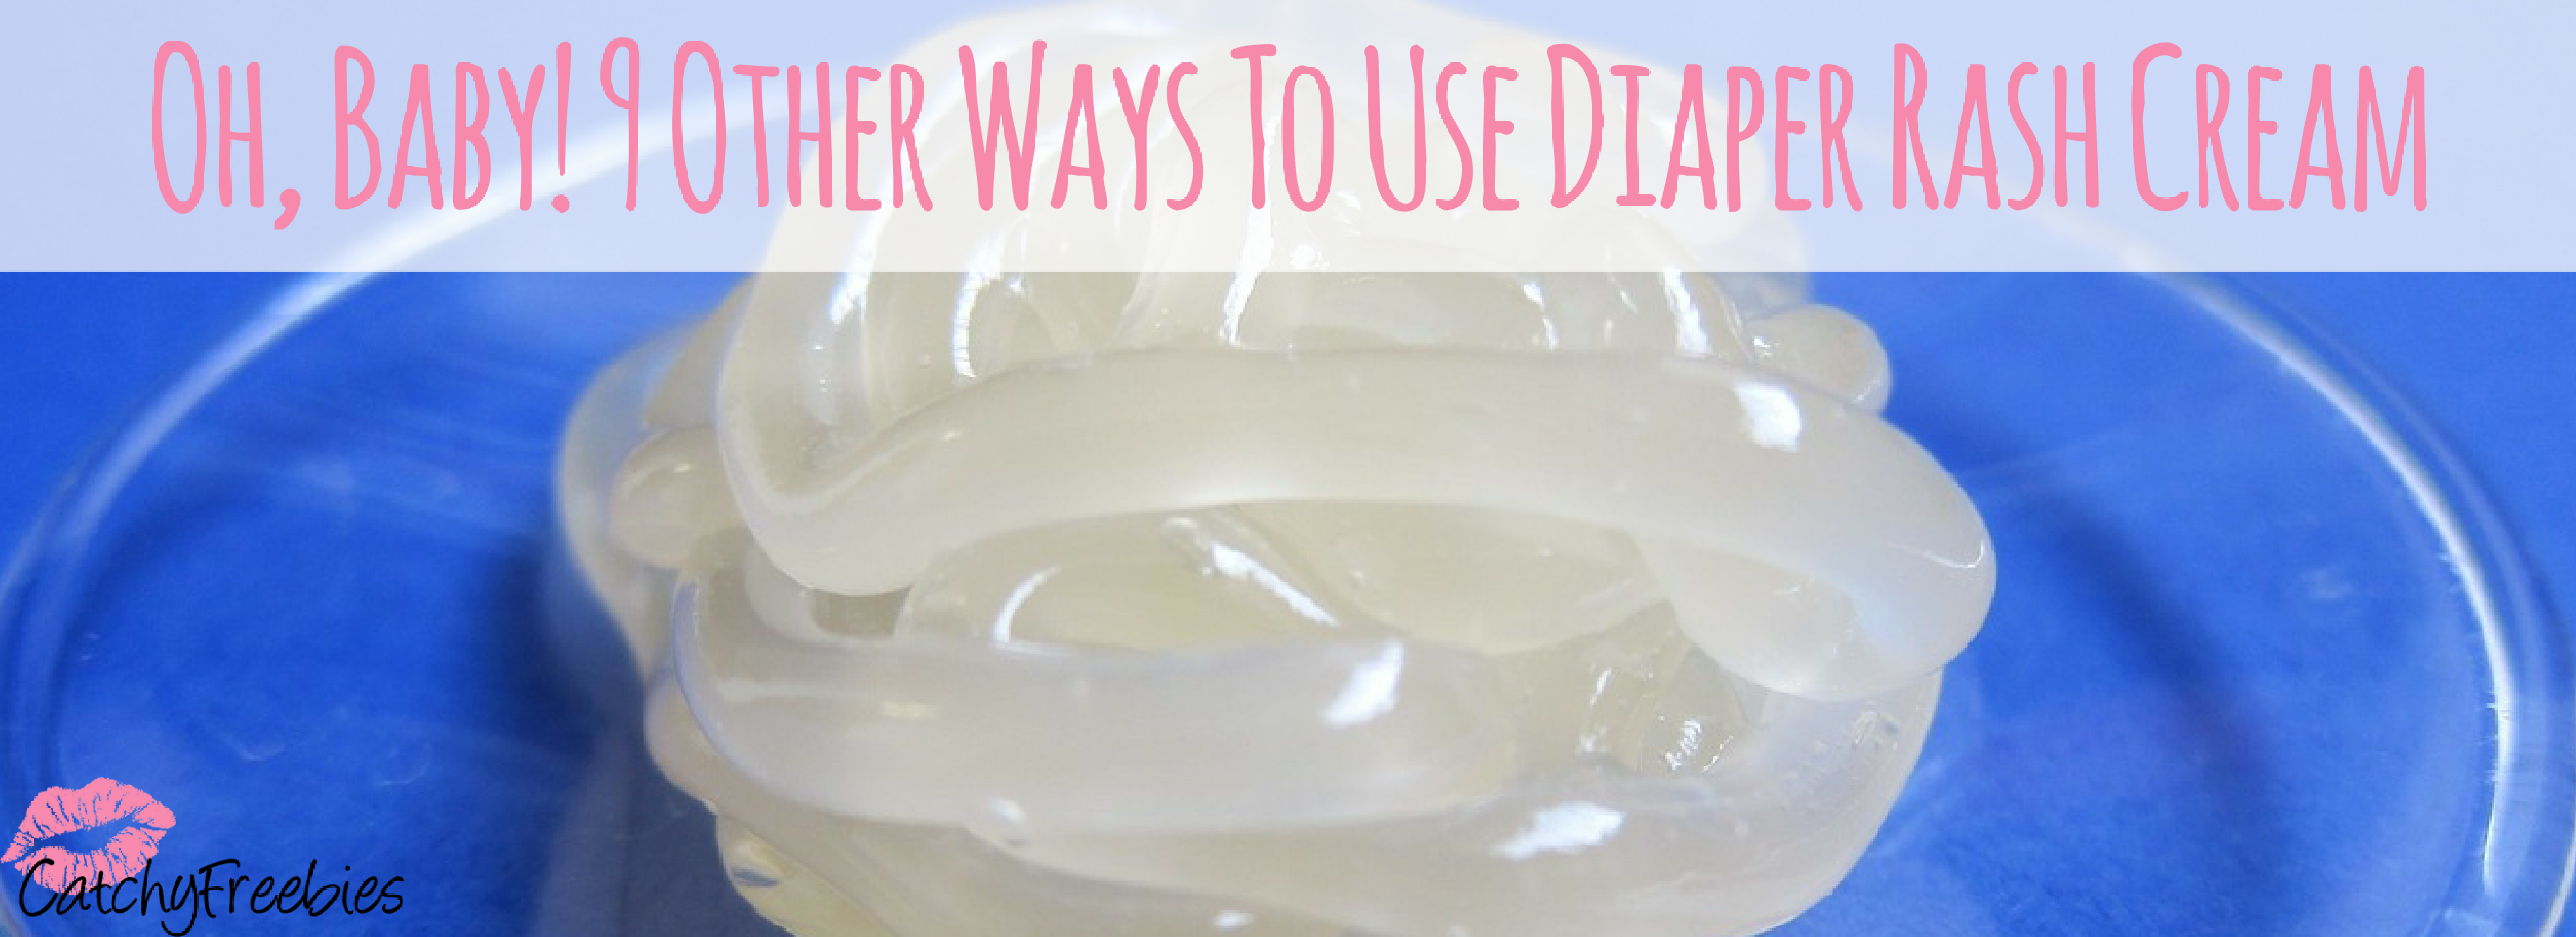 Oh, Baby! 9 Other Ways To Use Diaper Rash Cream